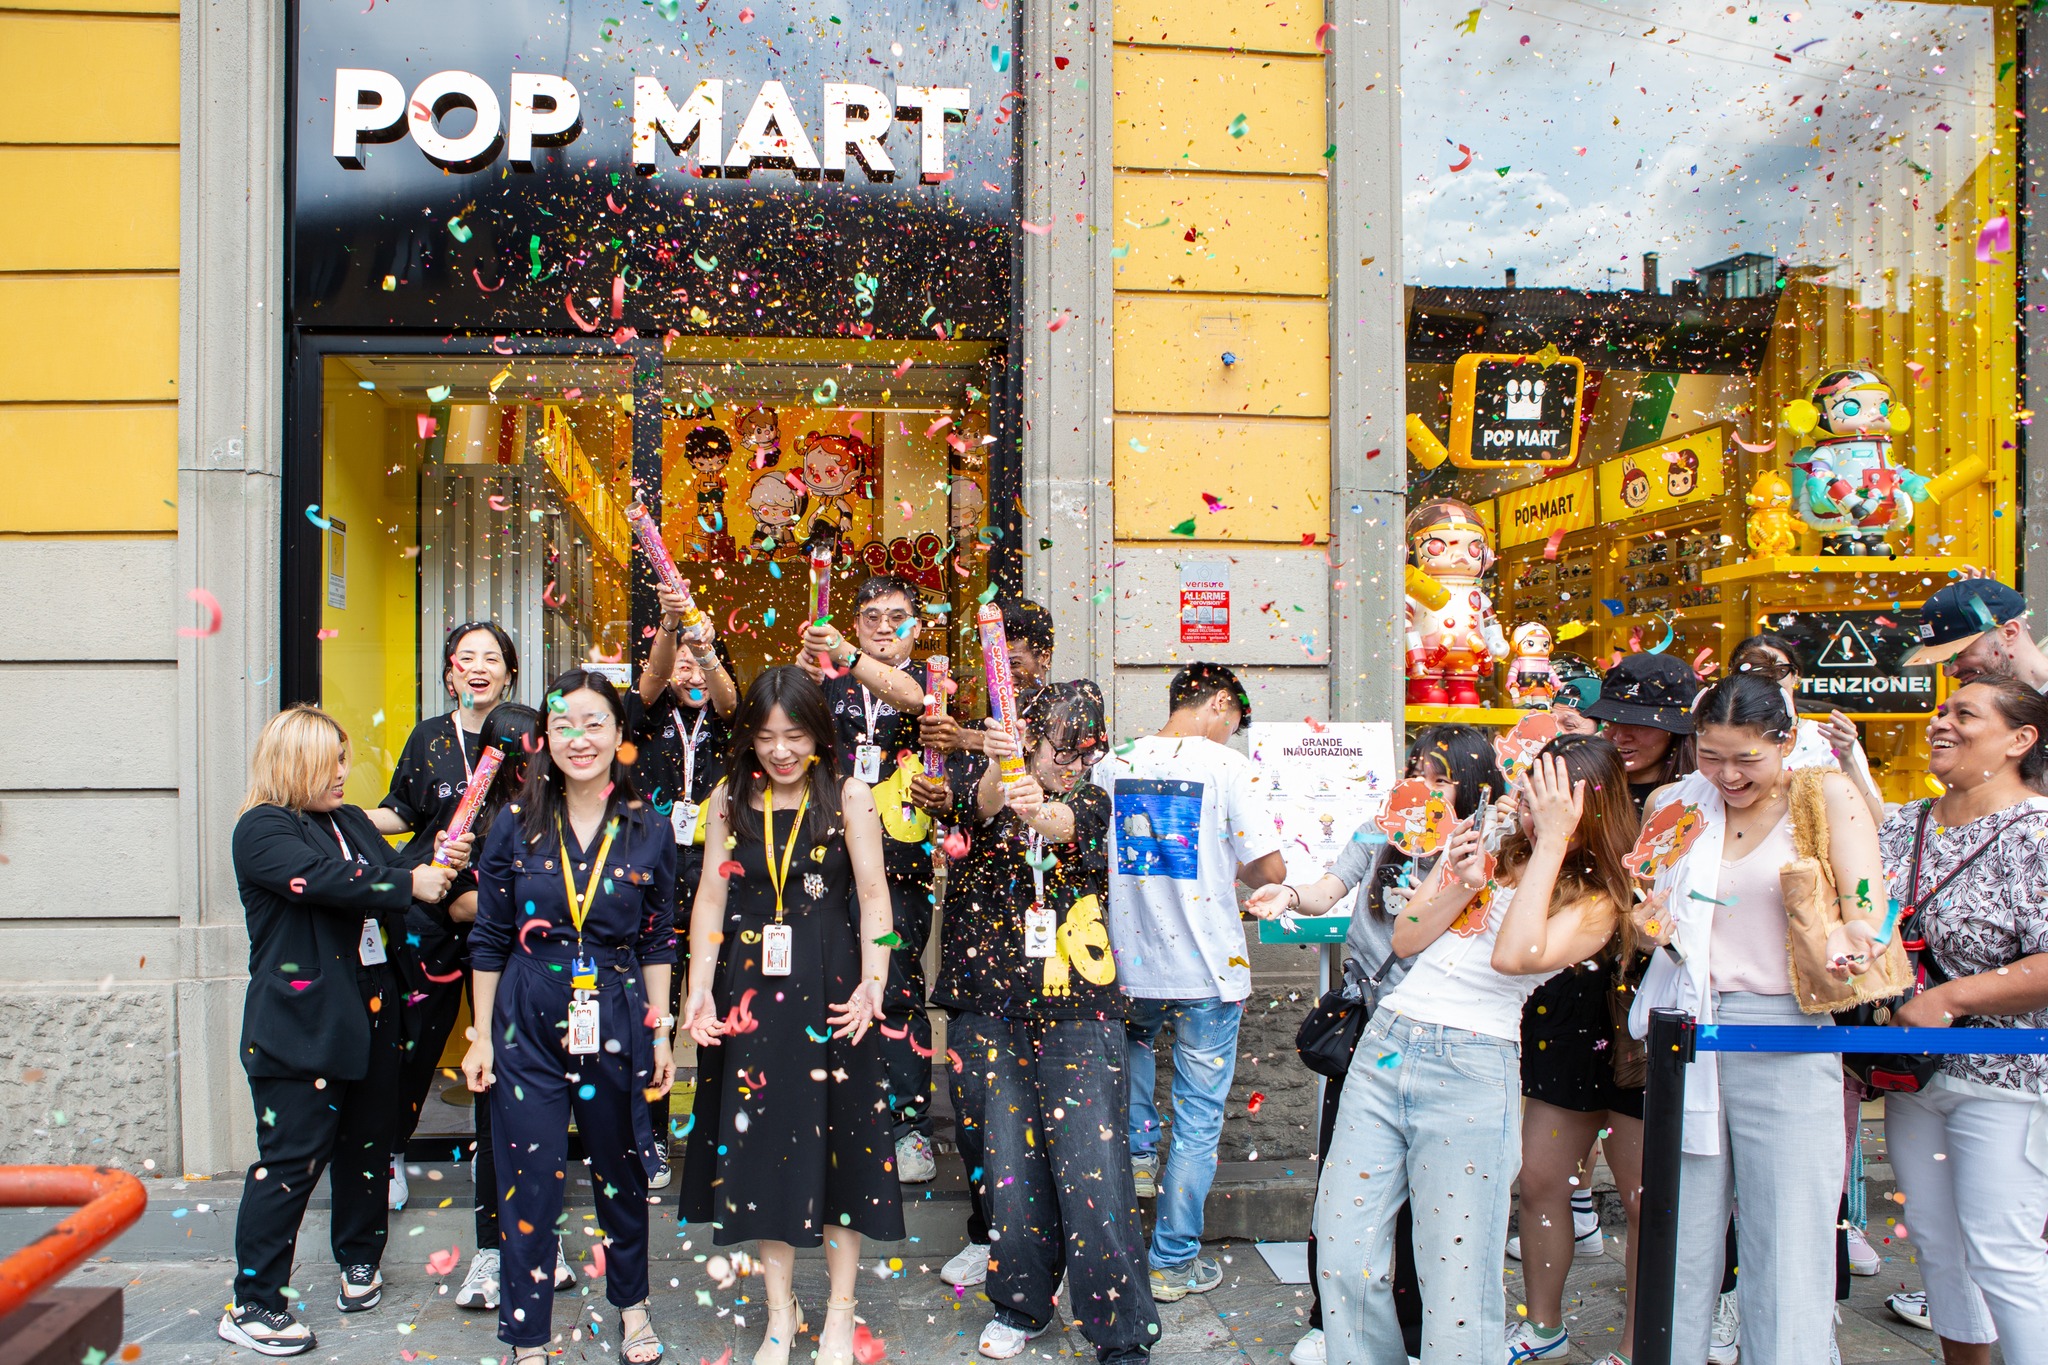 Pop Mart Expands European Presence with New Stores in Milan, Italy and Amsterdam, Netherlands